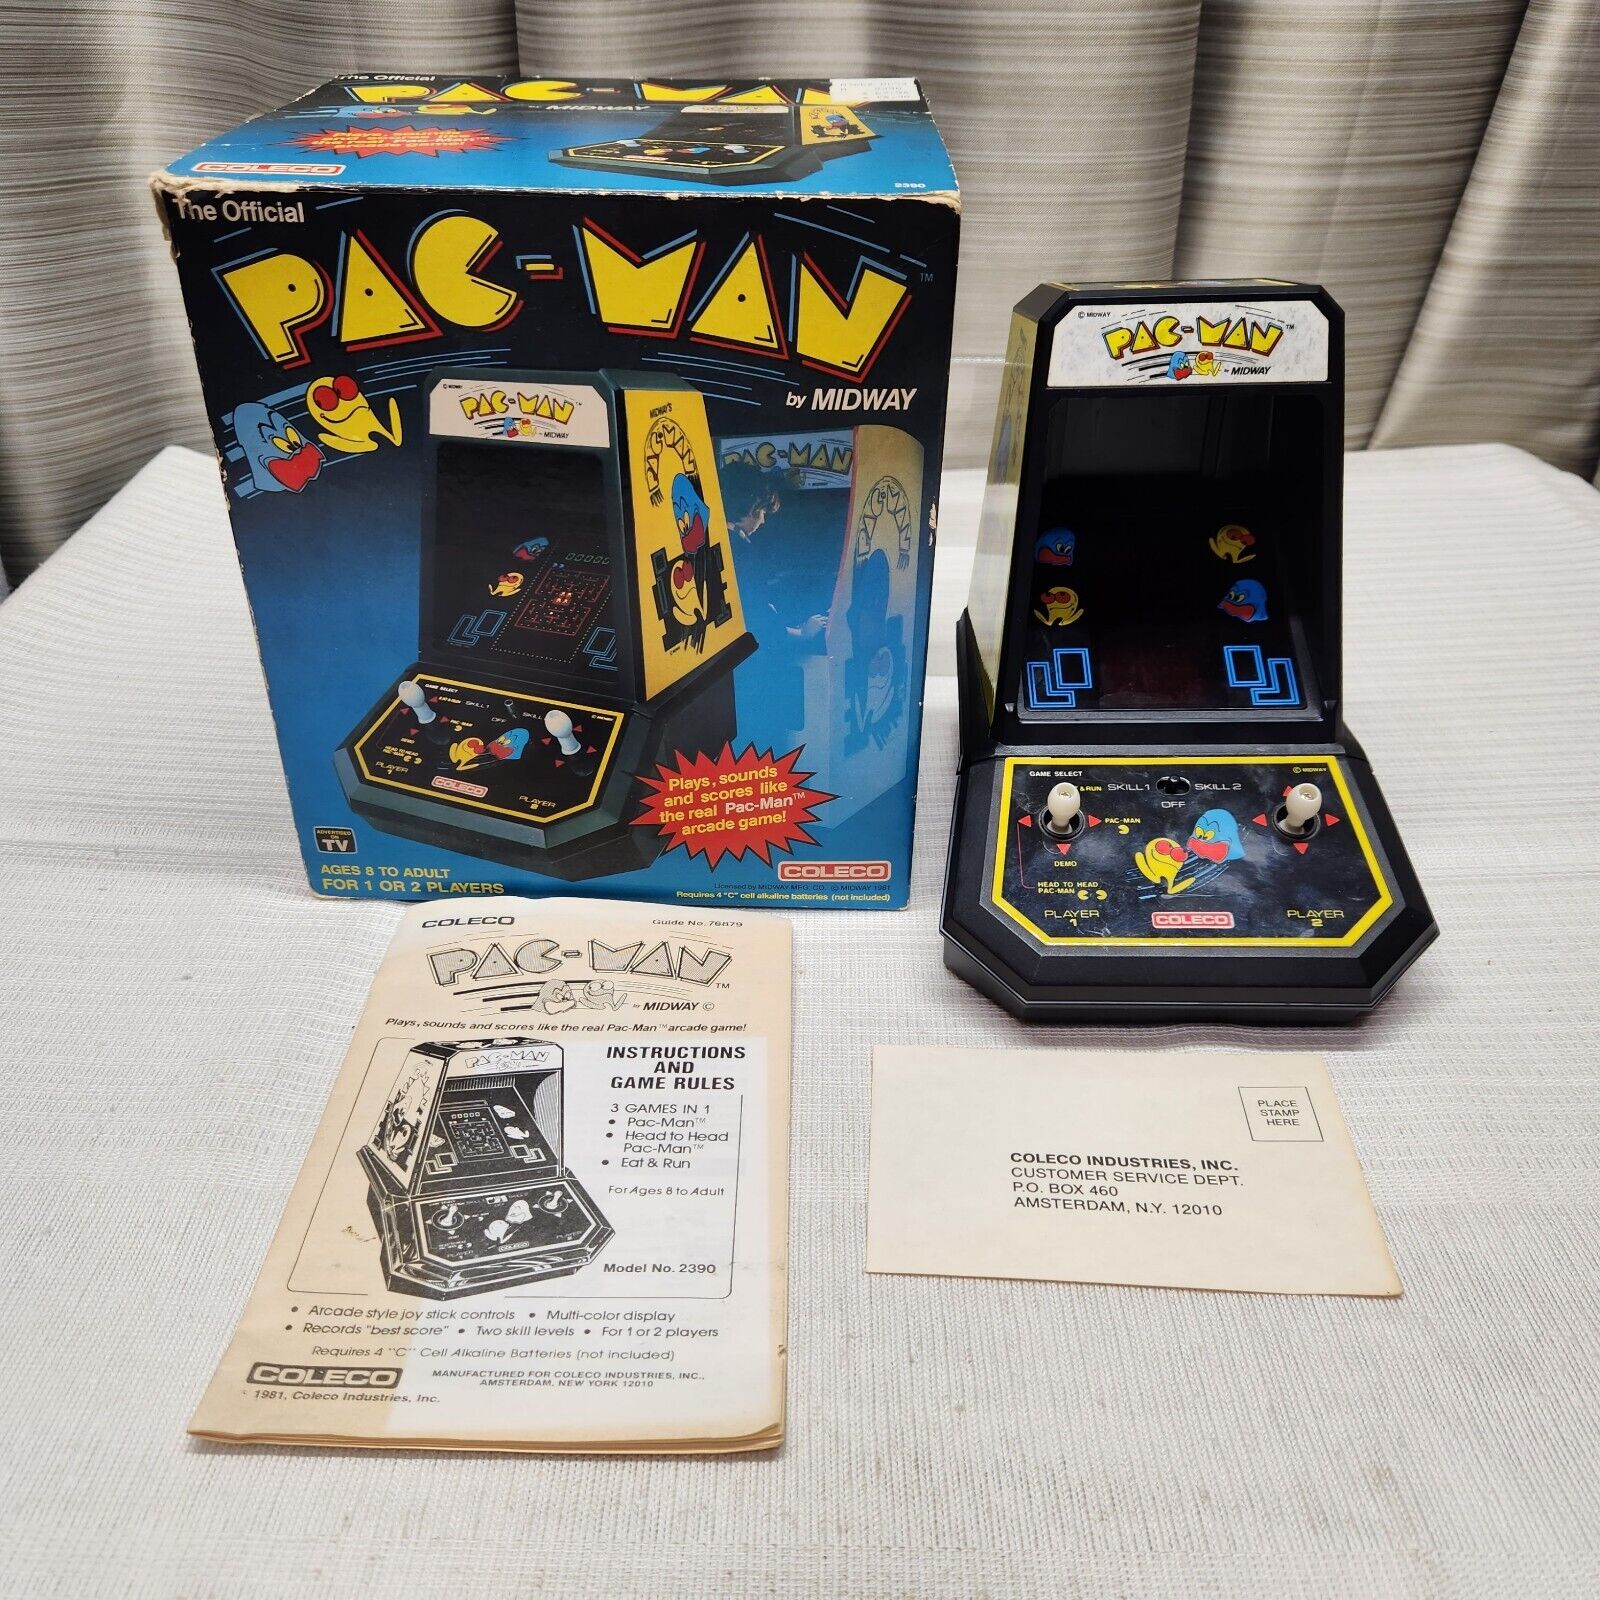 1981 Coleco Pac-Man Tabletop Arcade Game In Original Box Pacman -works Great